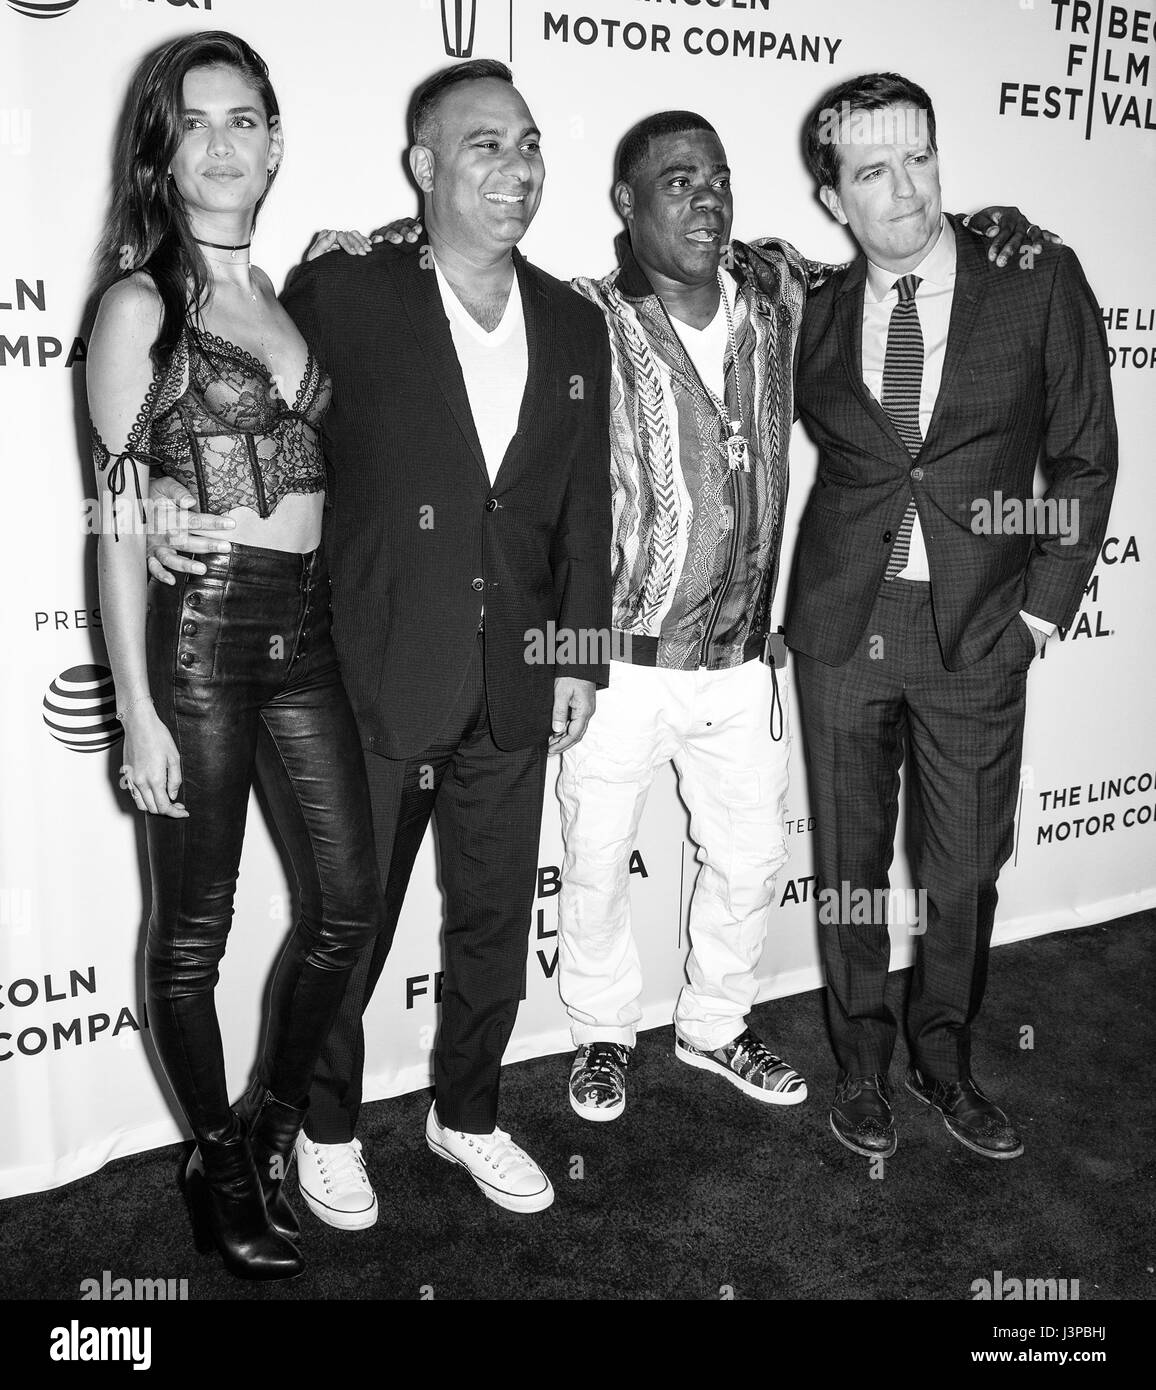 NEW YORK, NY - APRIL 23, 2017: (L-R) Sara Sampaio, Russell Peters, Tracy Morgan and producer Ed Helms attend 'The Clapper' Premiere during the 2017 Tr Stock Photo